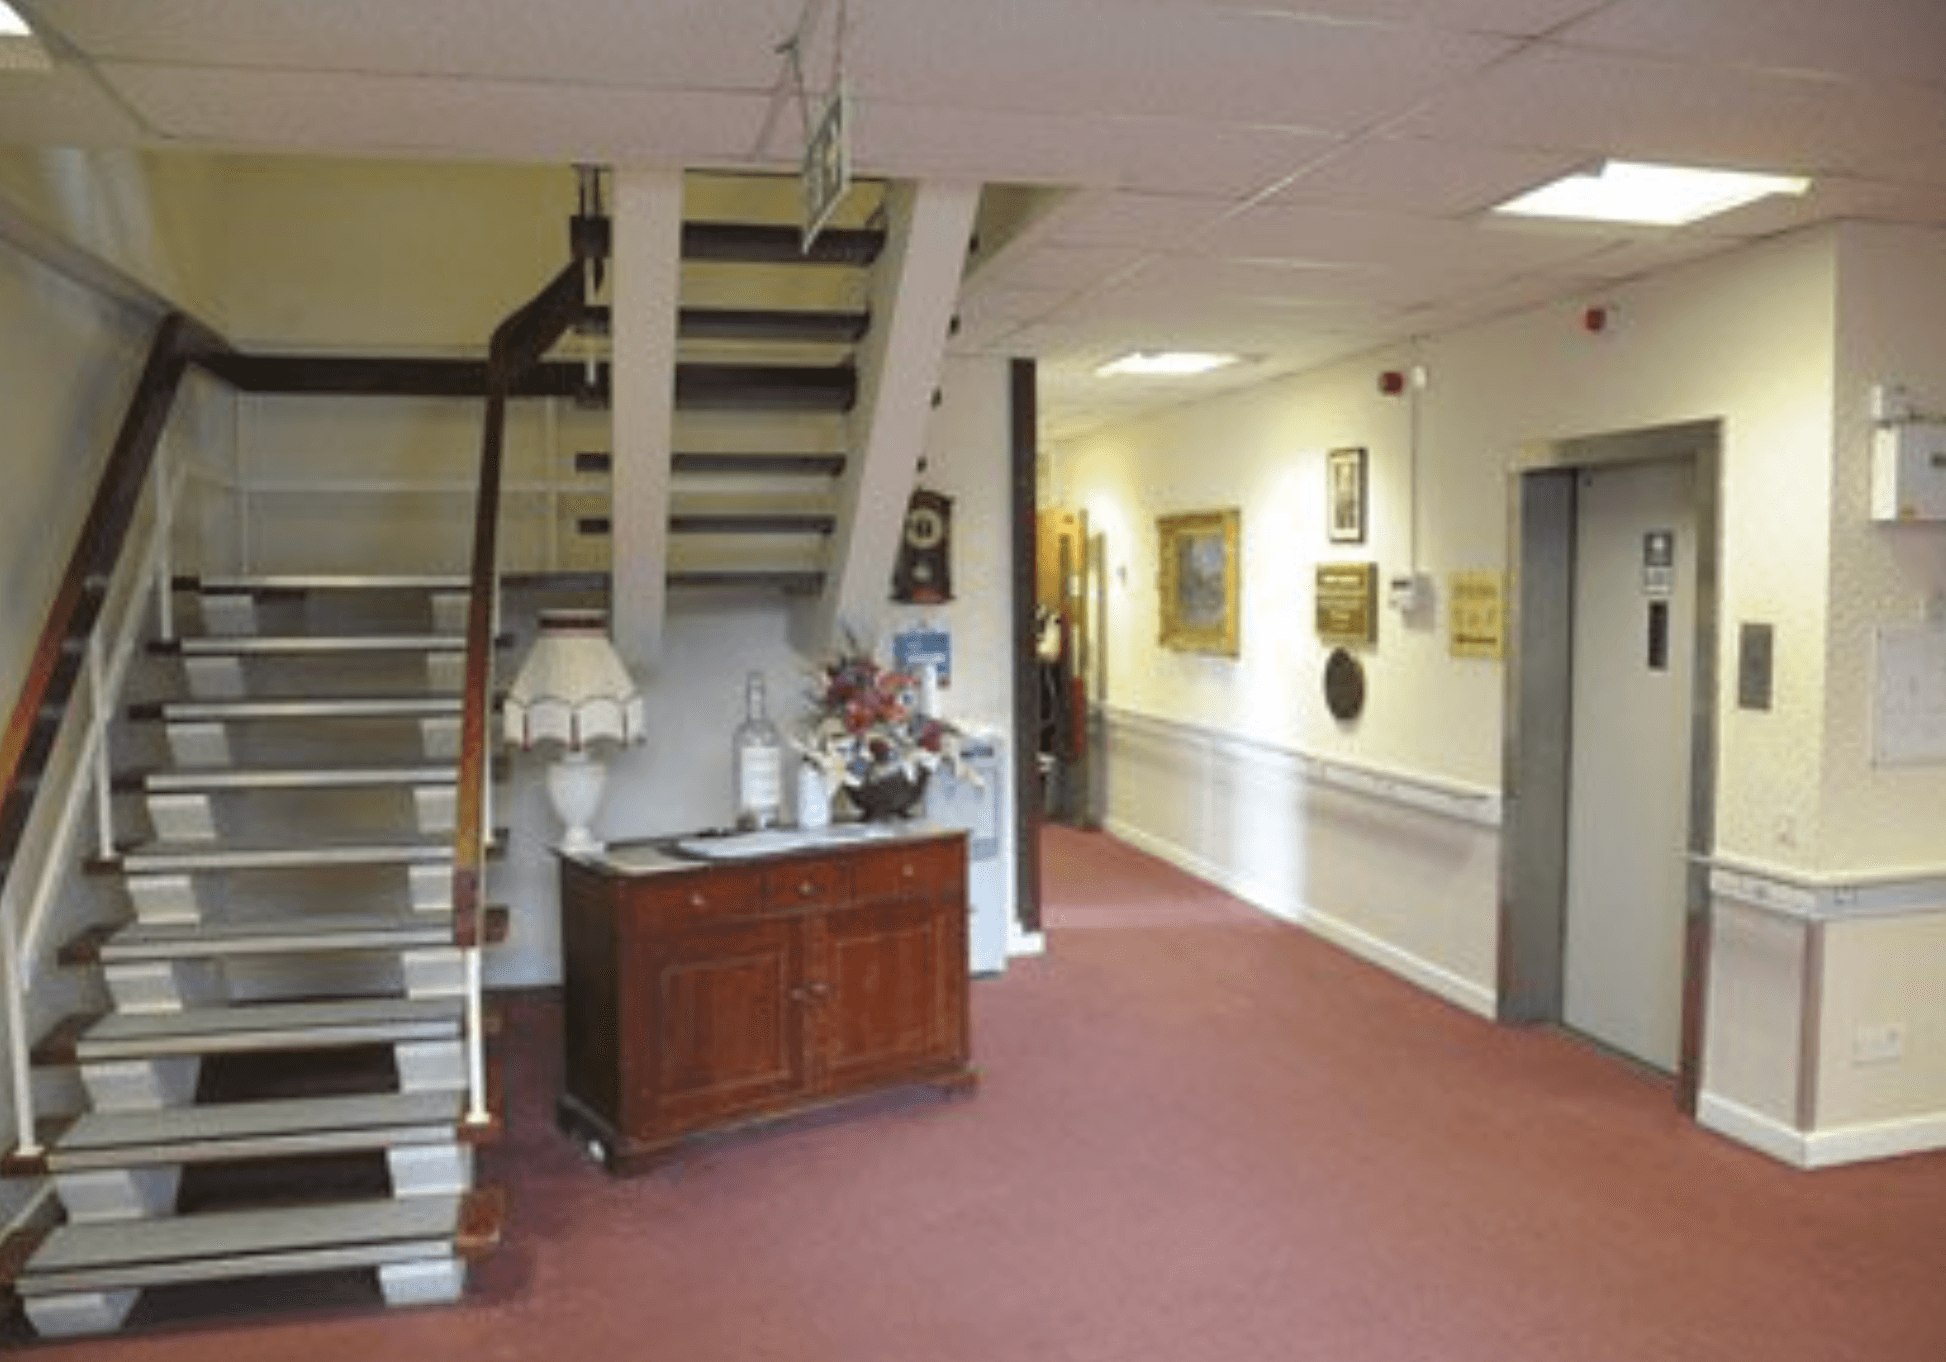 Hallway of Harvey House care home in Leicester